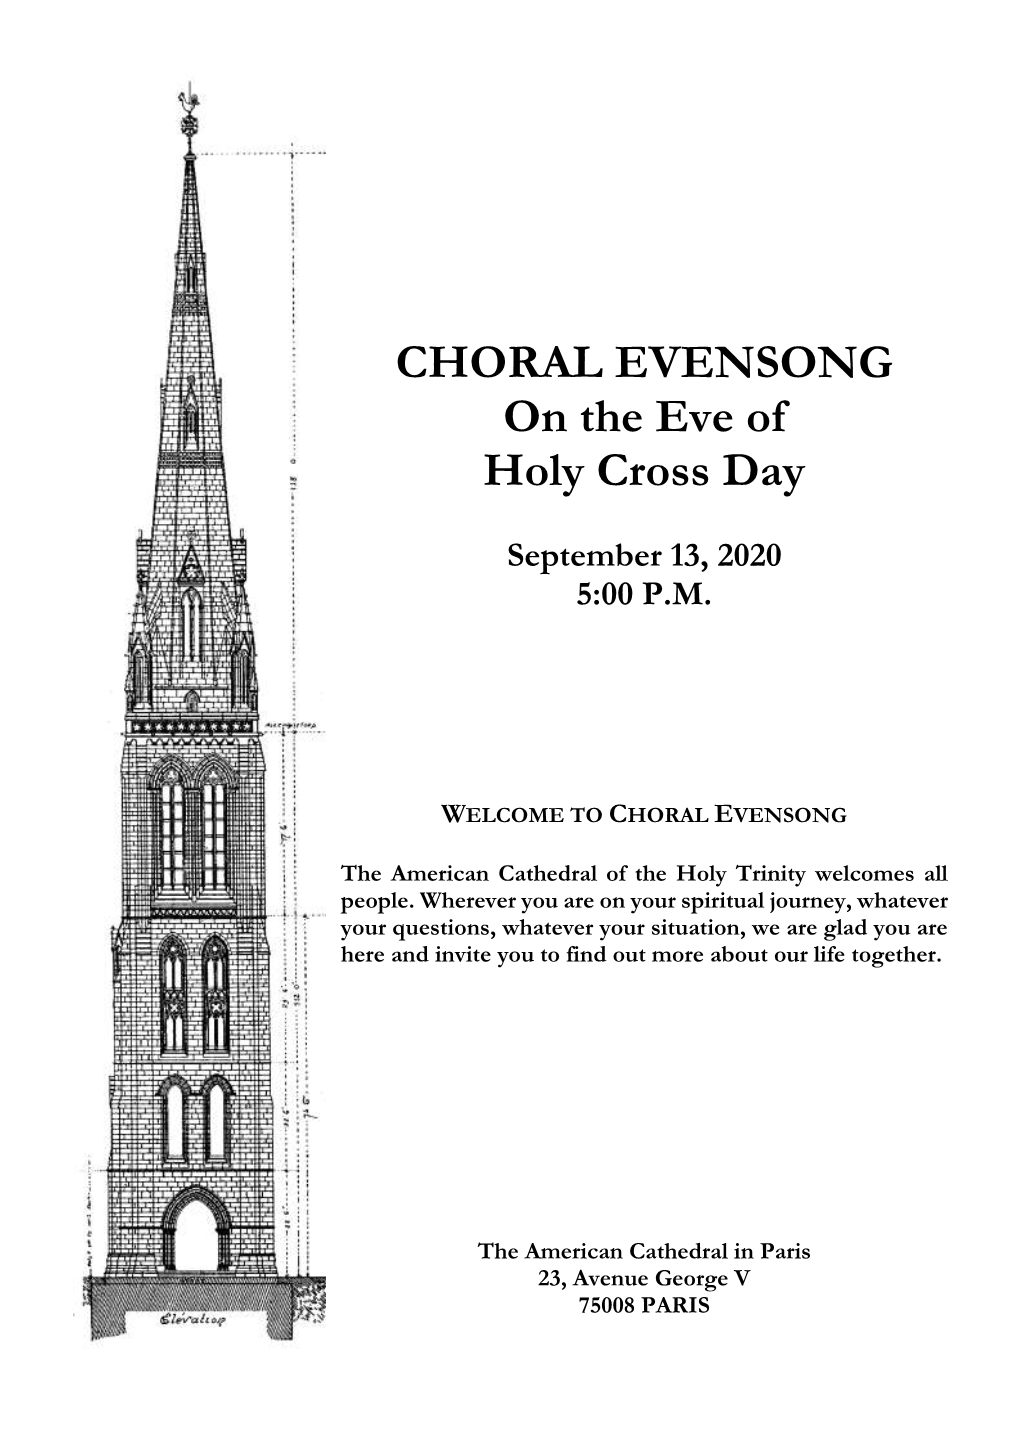 CHORAL EVENSONG on the Eve of Holy Cross Day